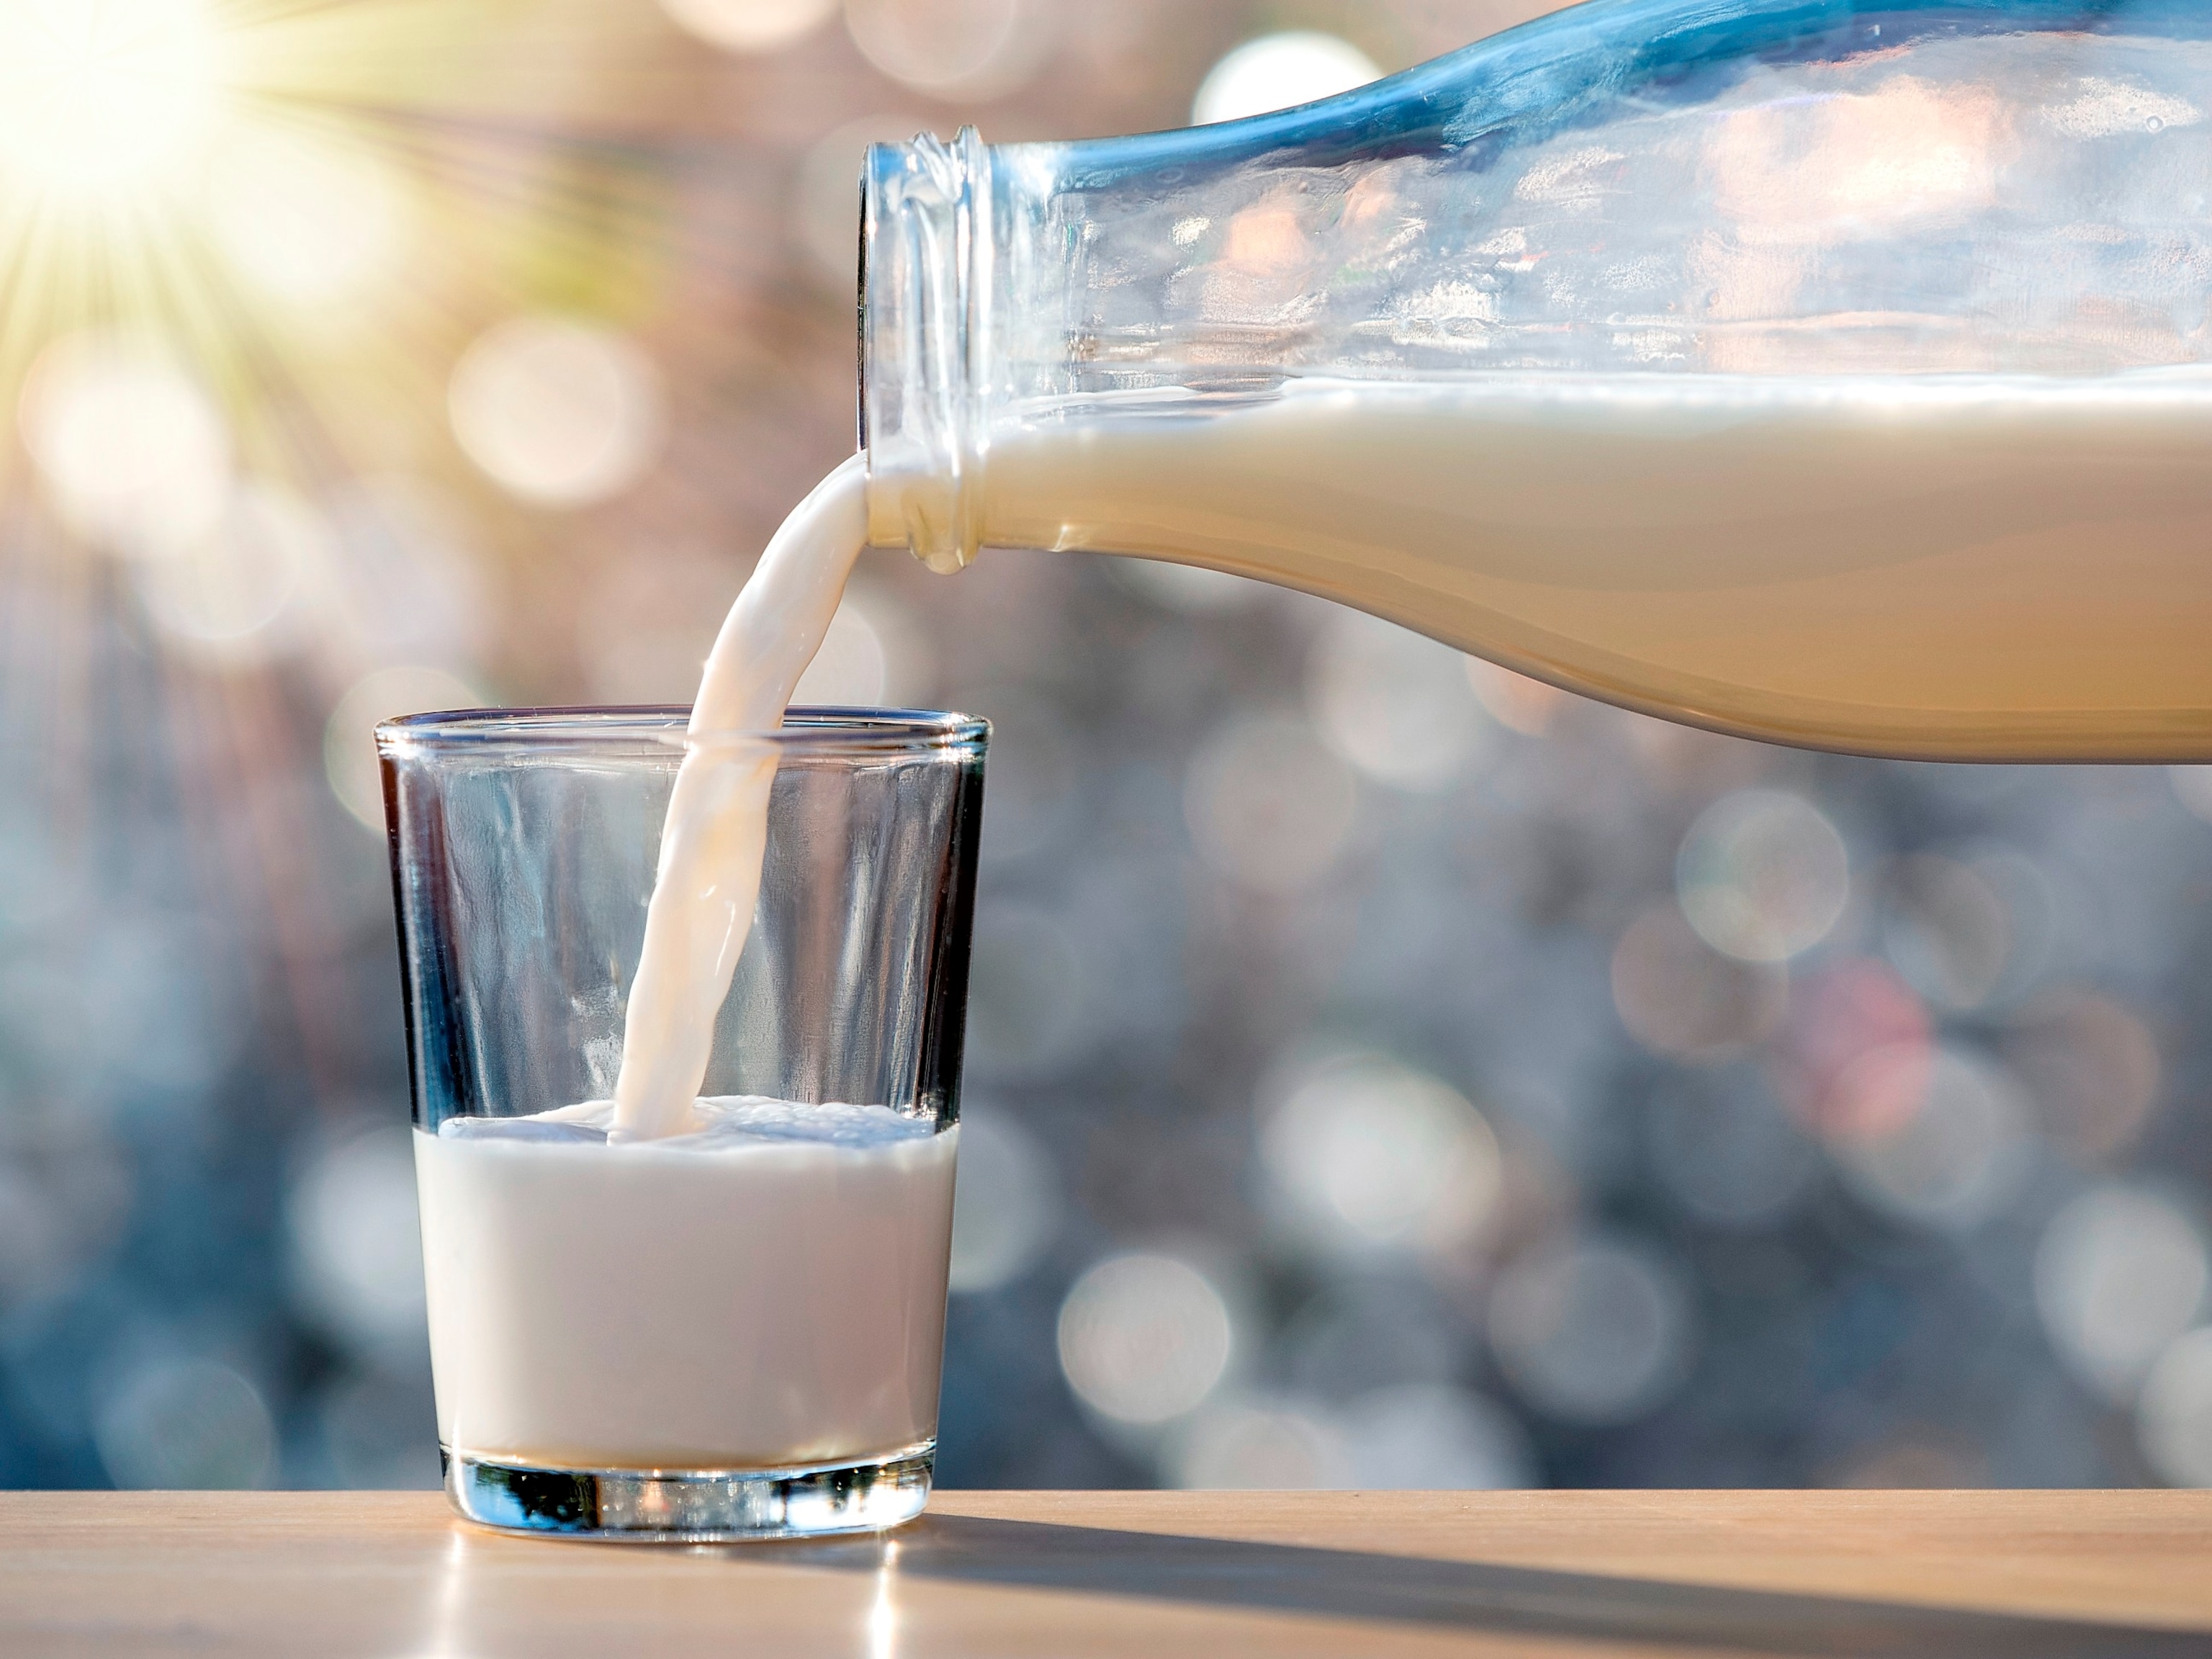 PHOTO: Milk is seen in an undated stock photo.